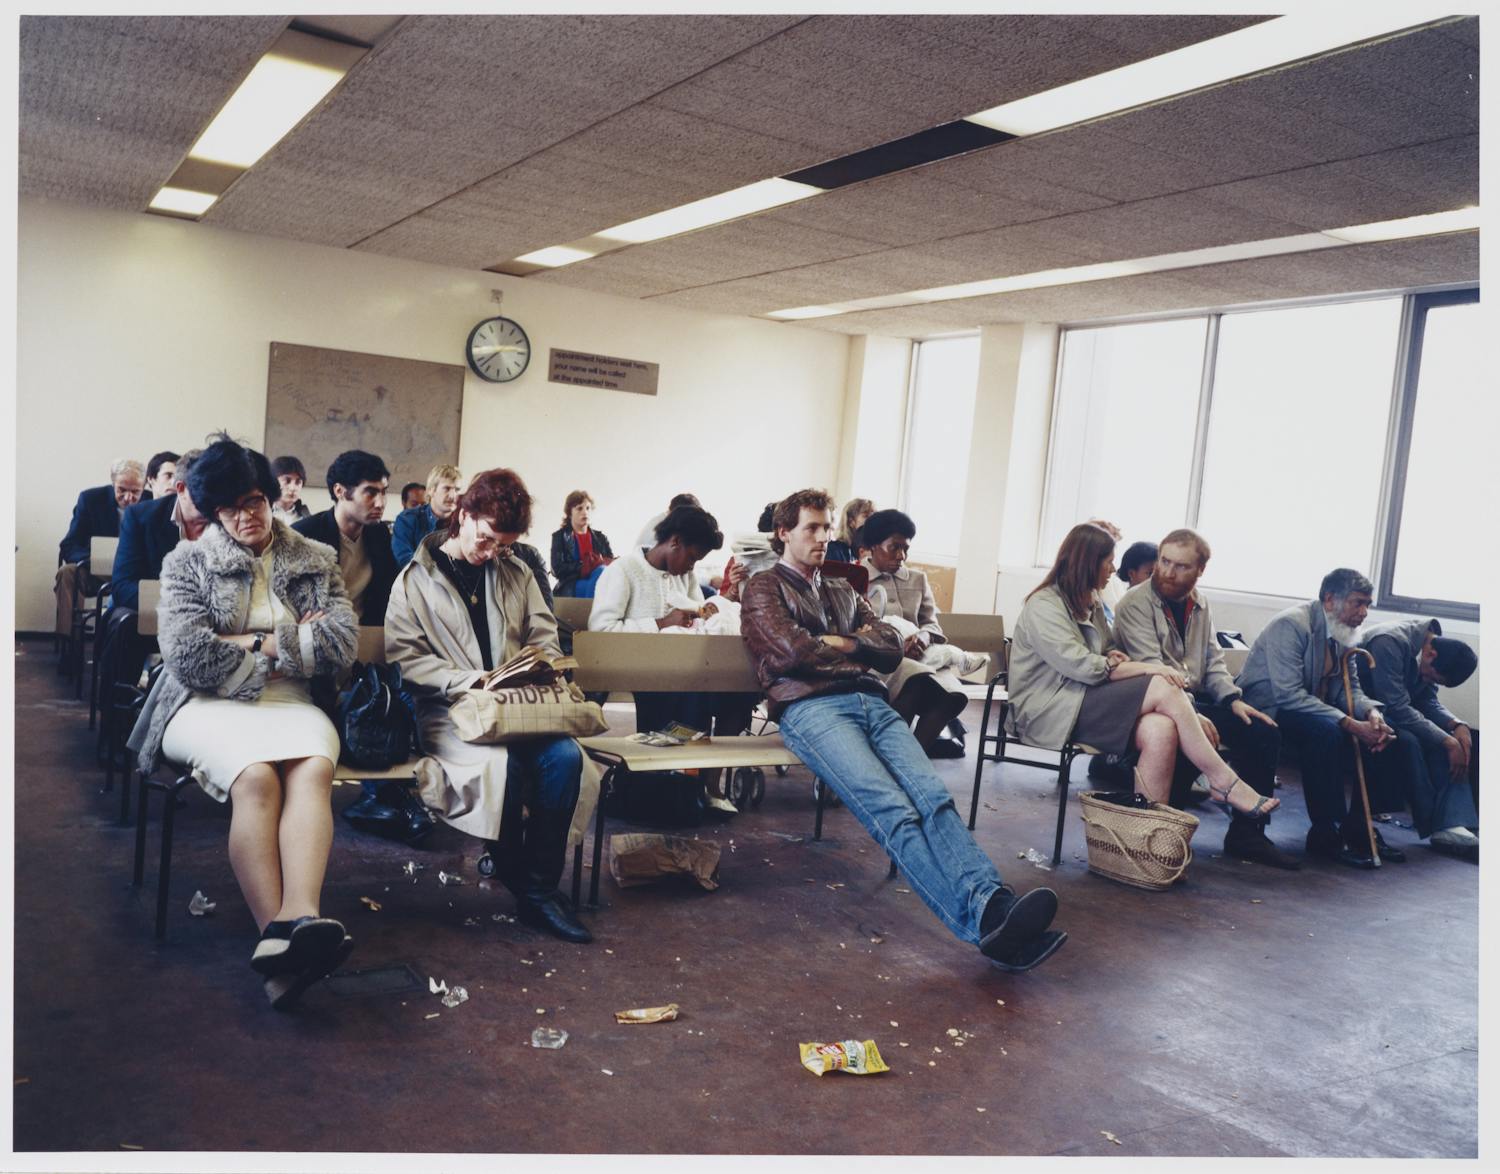 [ID: The image shows a barren room with a window front on the right side. People are sitting on benches which are placed throughout the room. End of ID]